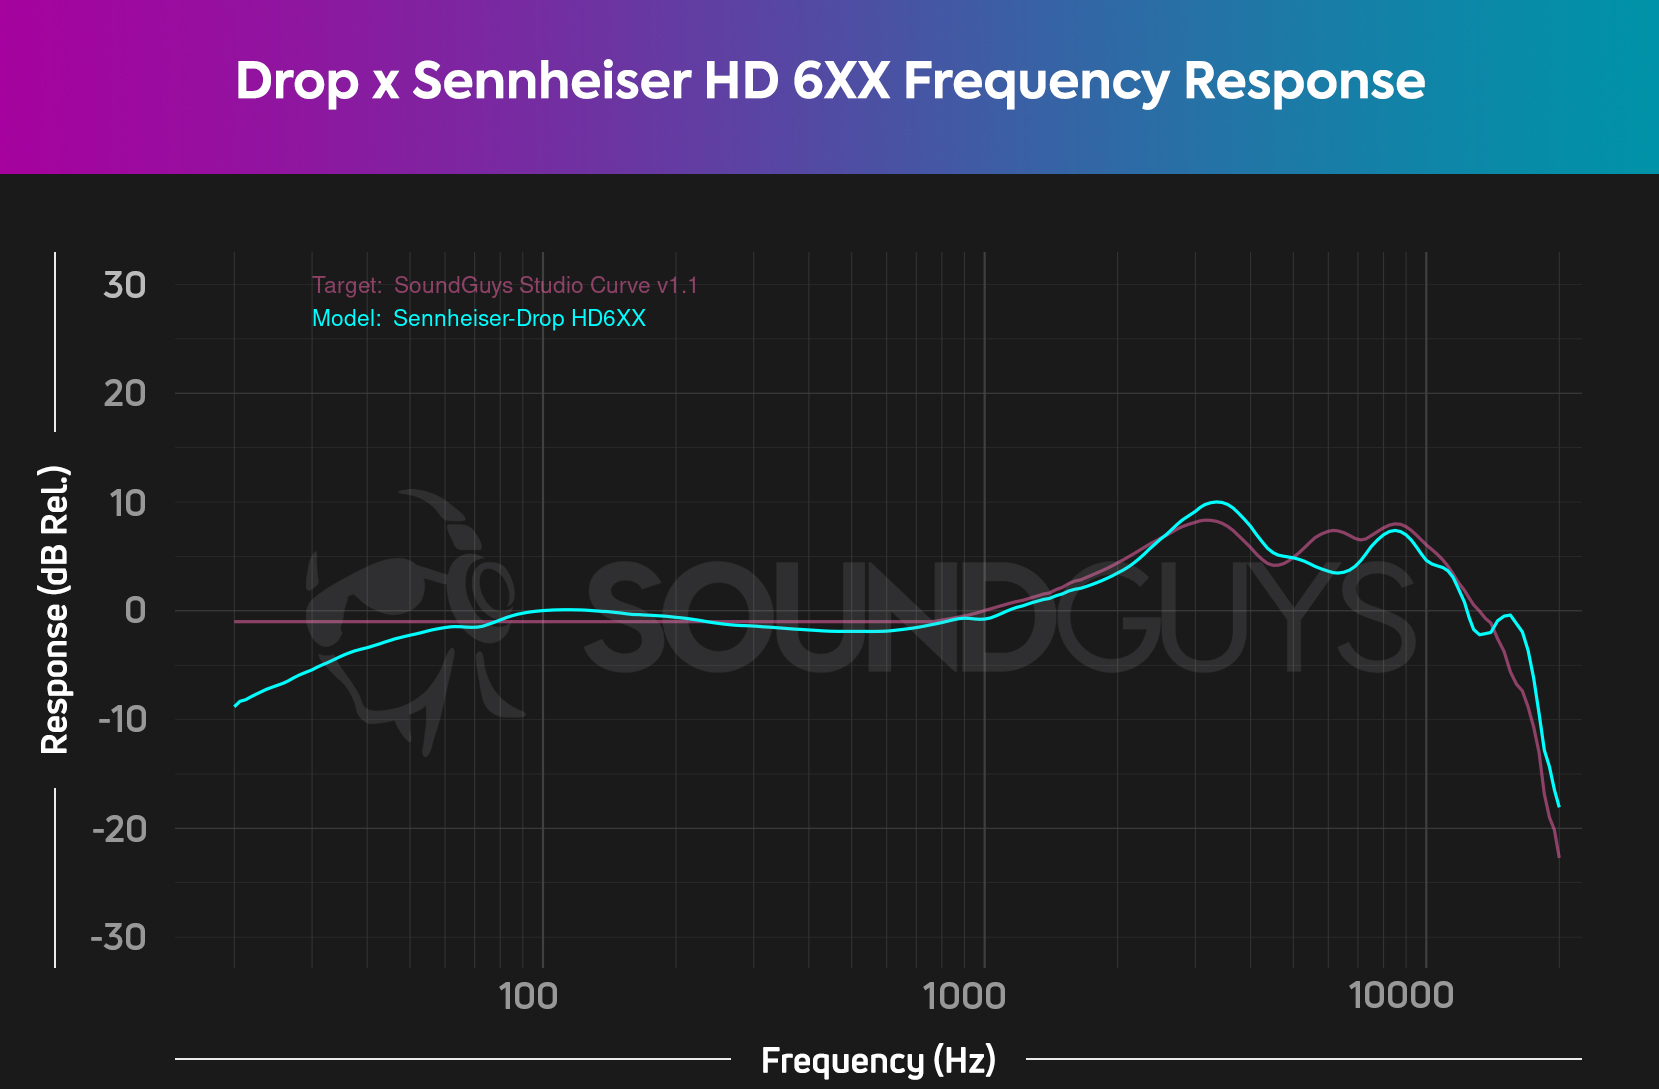 A chart shows the Drop x Sennheiser HD 6XX frequency response relative to the SoundGuys studio curve, revealing a notably under-emphasized sub-bass response.